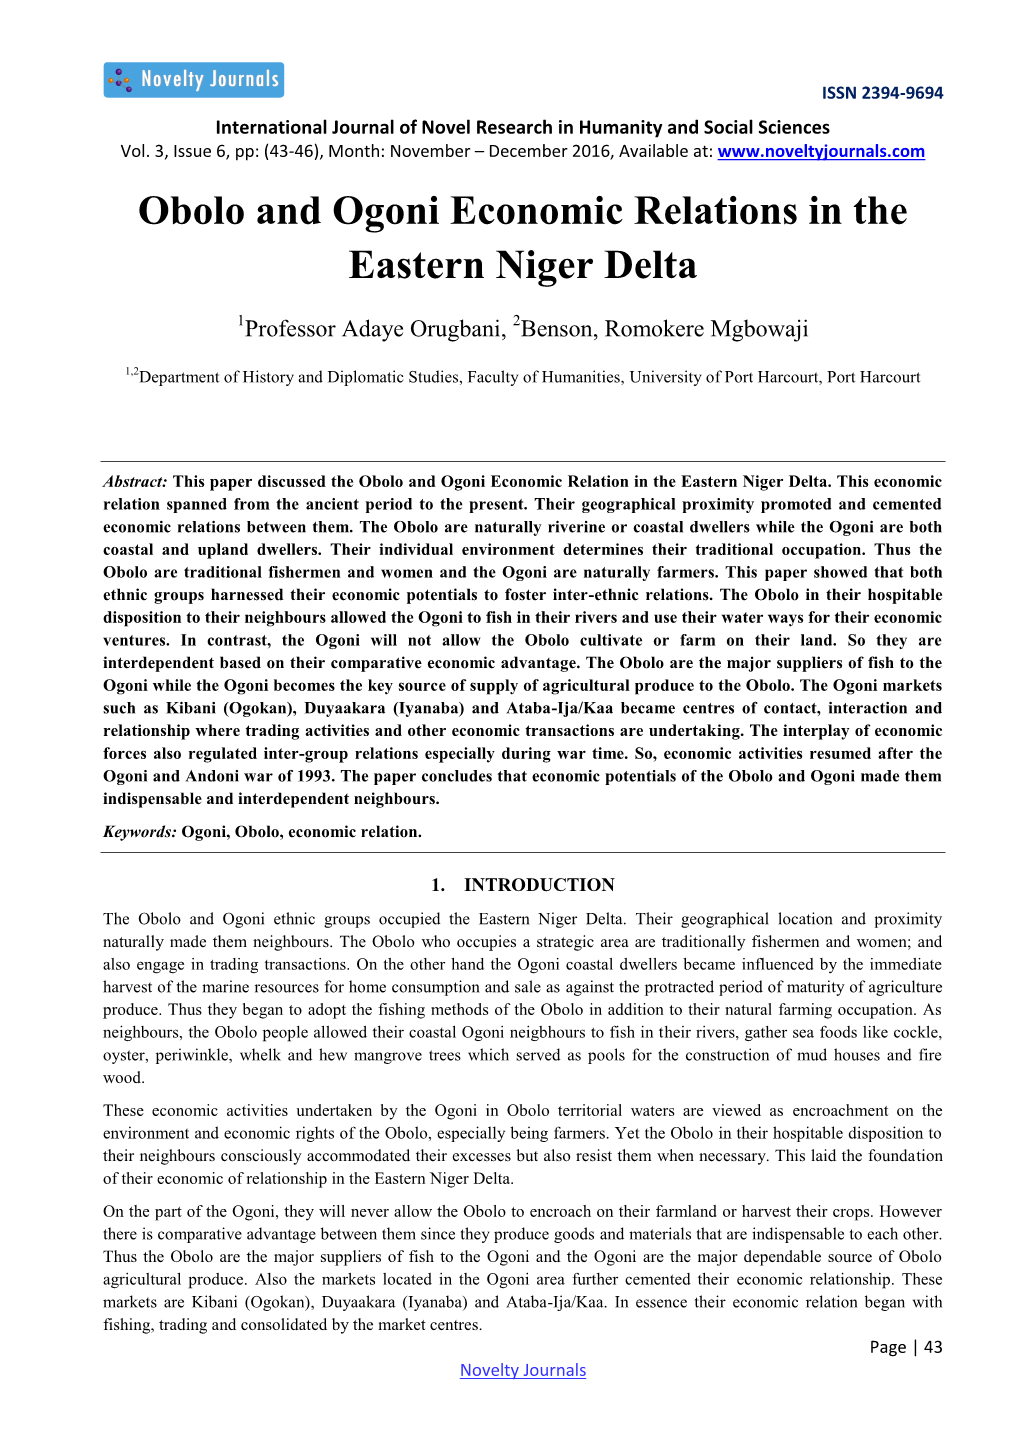 Obolo and Ogoni Economic Relations in the Eastern Niger Delta